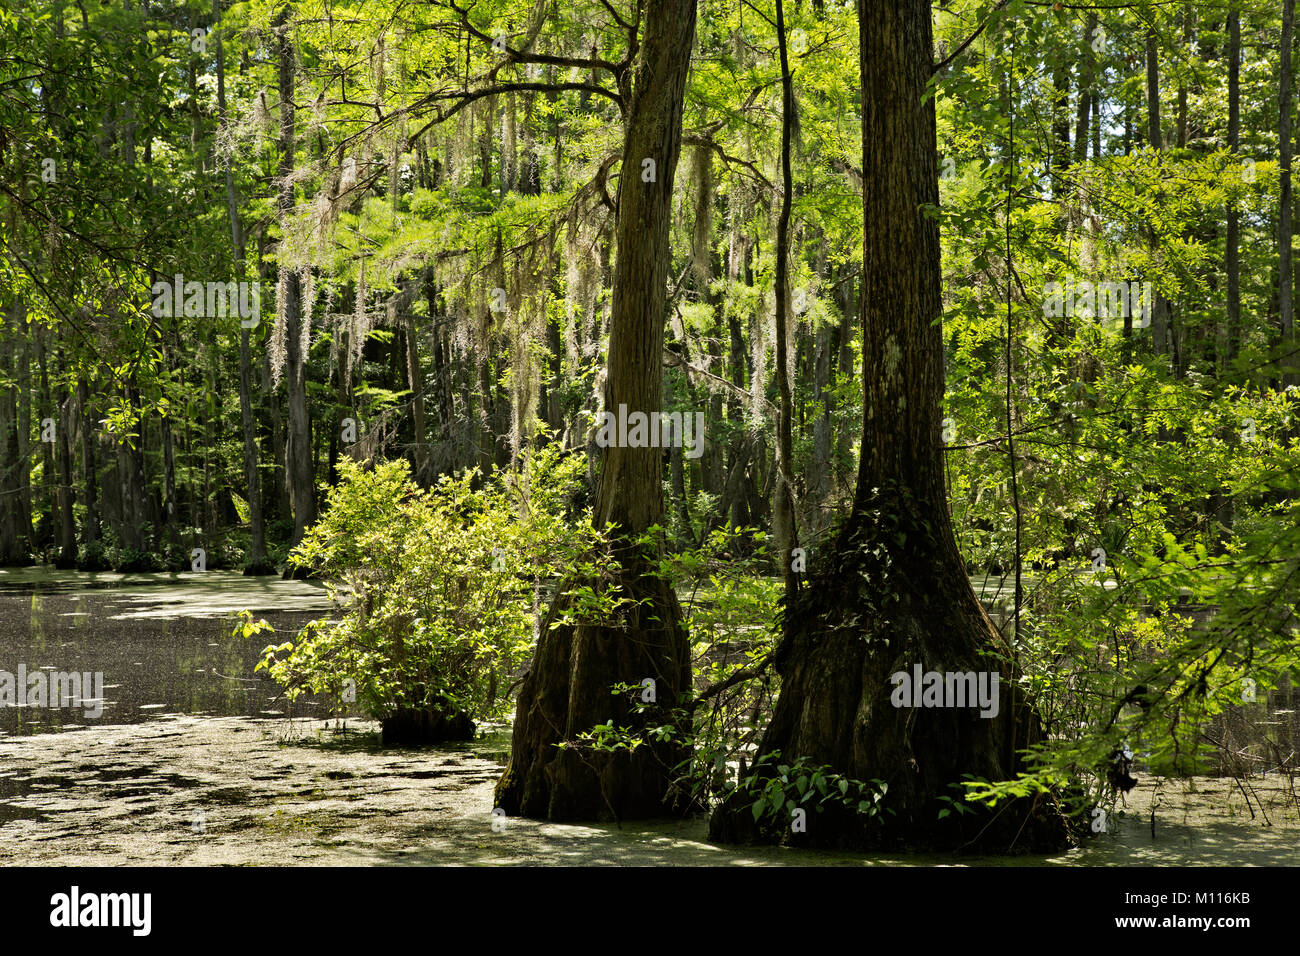 NC01442-00...NORTH CAROLINA - Spanish moss hanging from bald cypress trees growing in Merchant Millpond State Park. Stock Photo